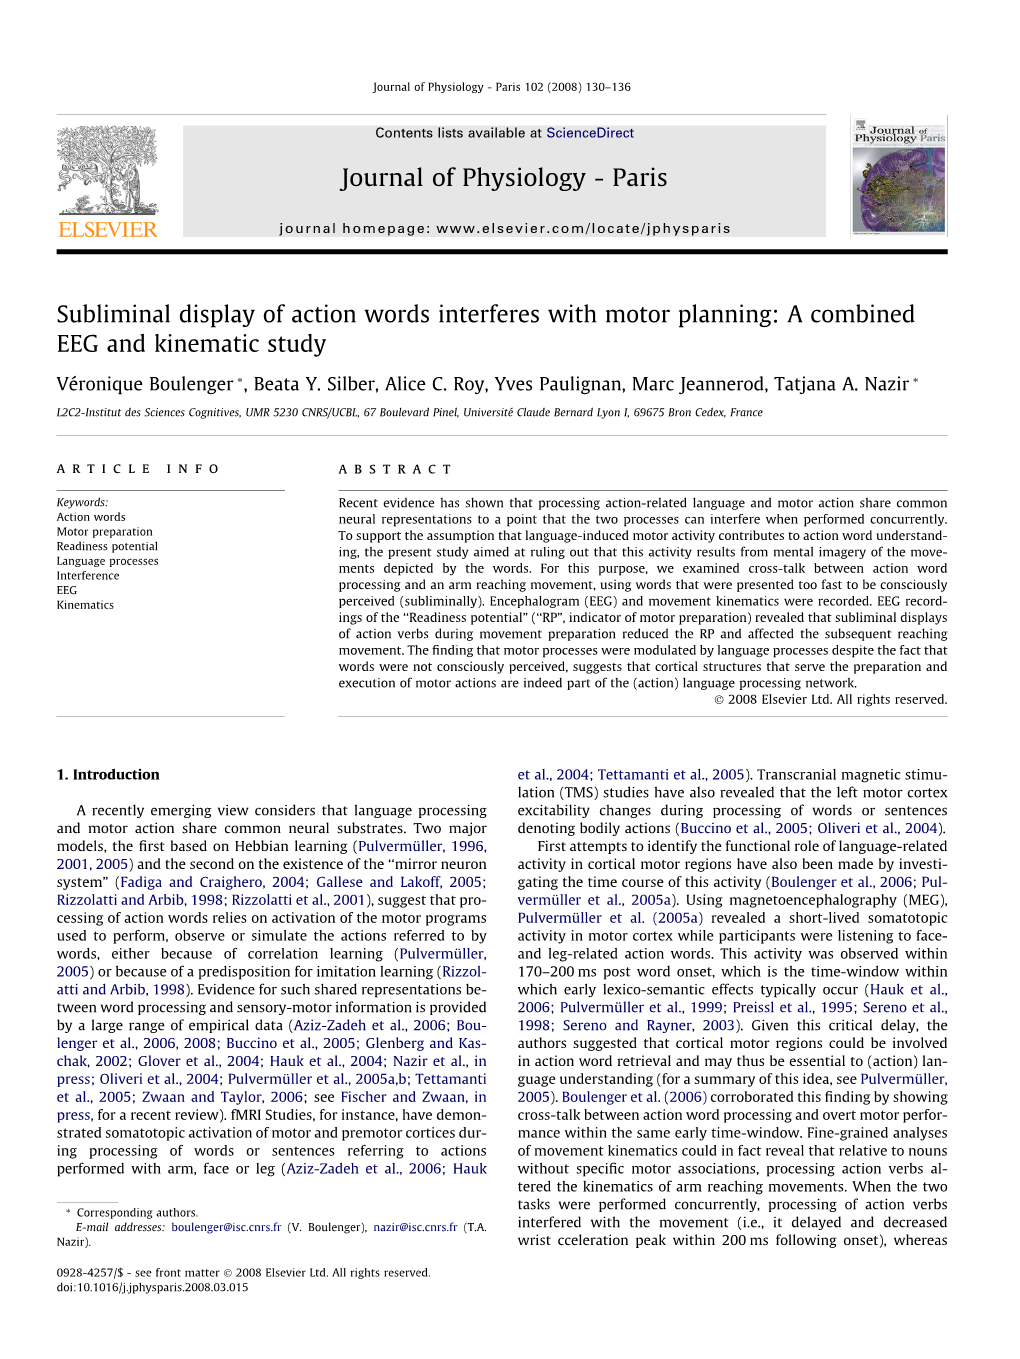 A Combined EEG and Kinematic Study Journal of Physiology